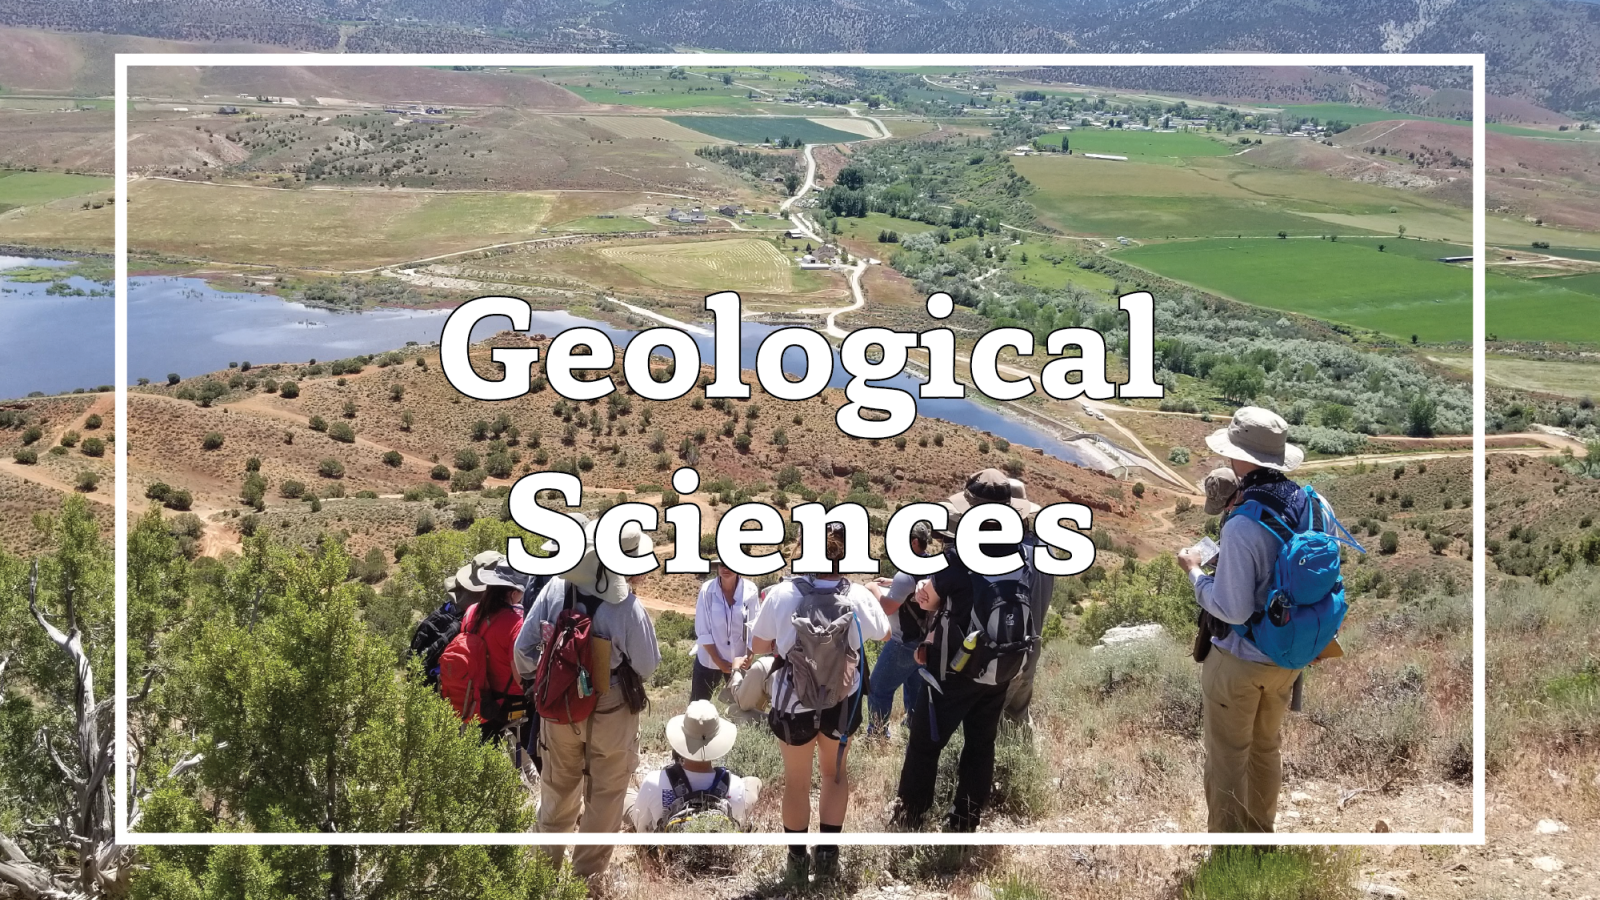 Photo of students at the SES Geology Field Camp. Overlain text reads "Geological Sciences".